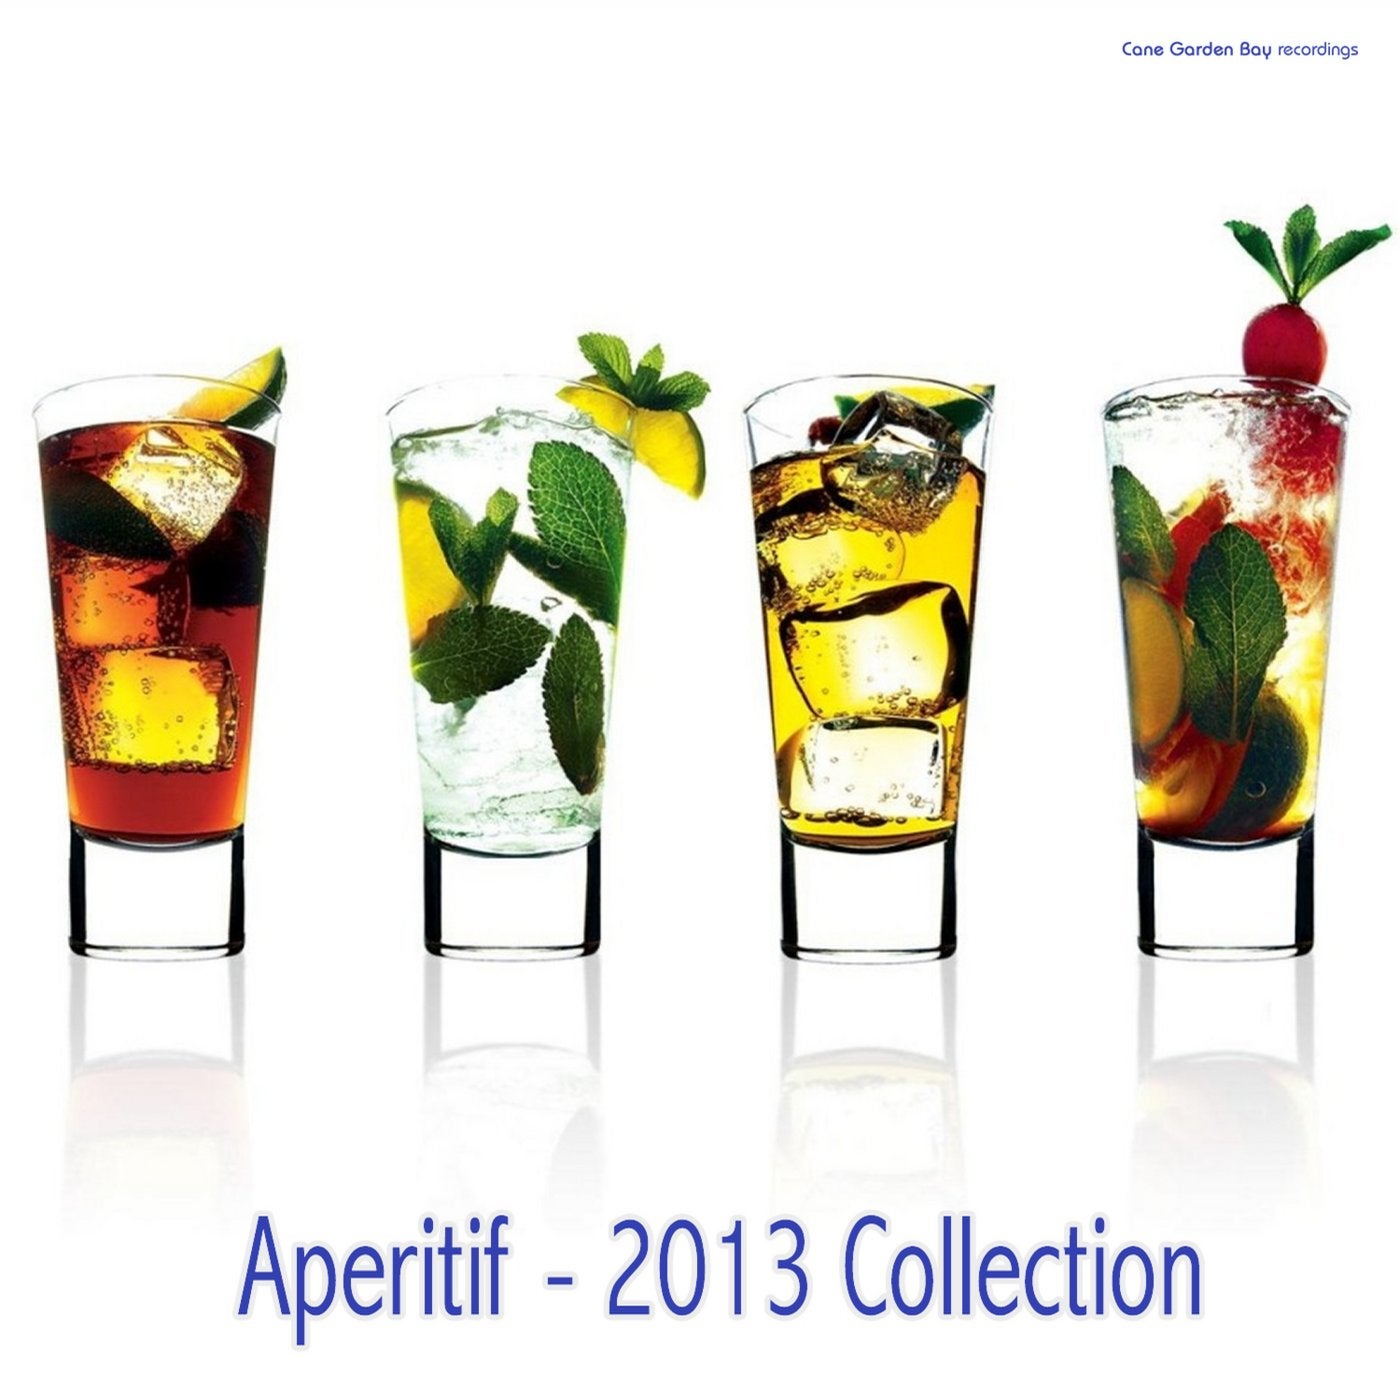 Aperitif - 2013 Collection